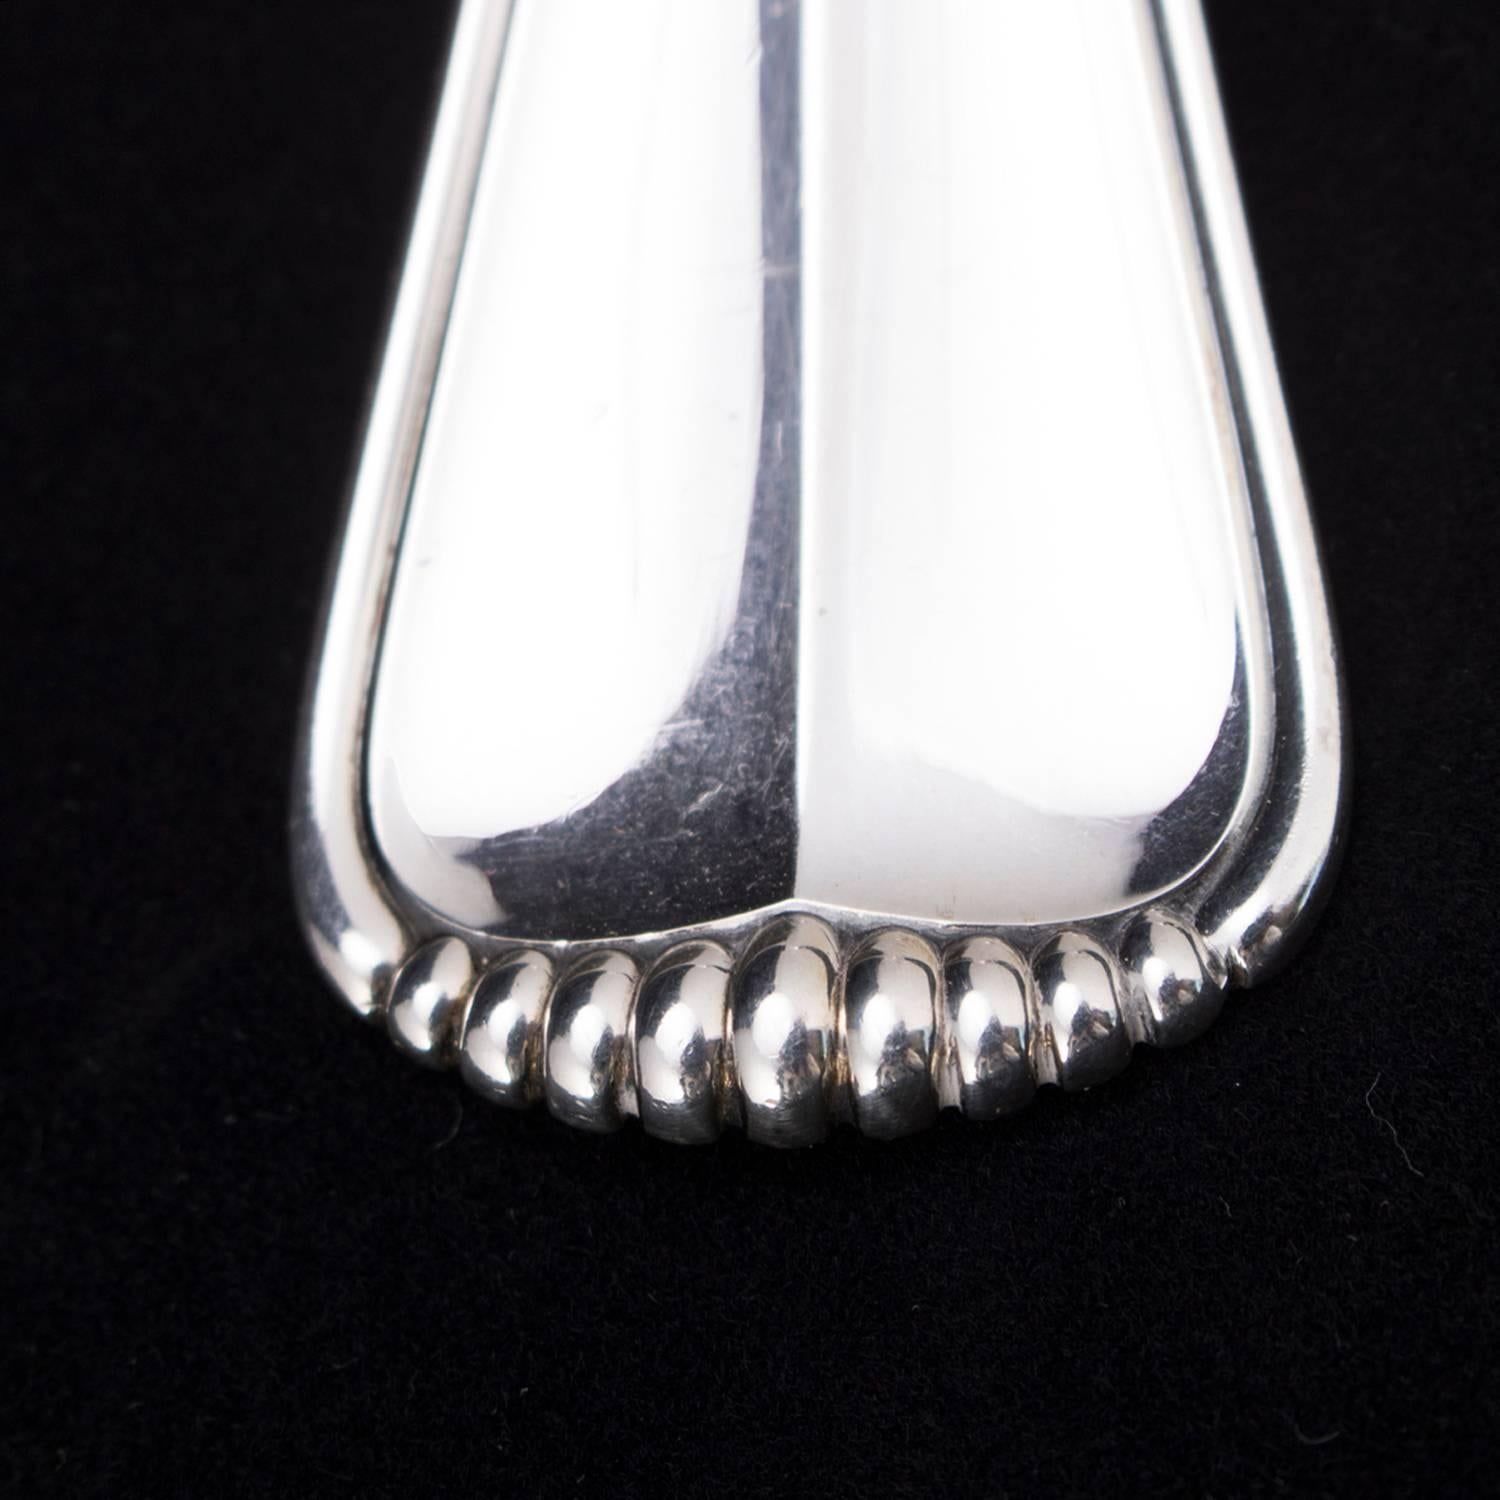 Italian Buccellati sterling silver serving spoon in Milano pattern features faceted handle with beaded crest, en verso 